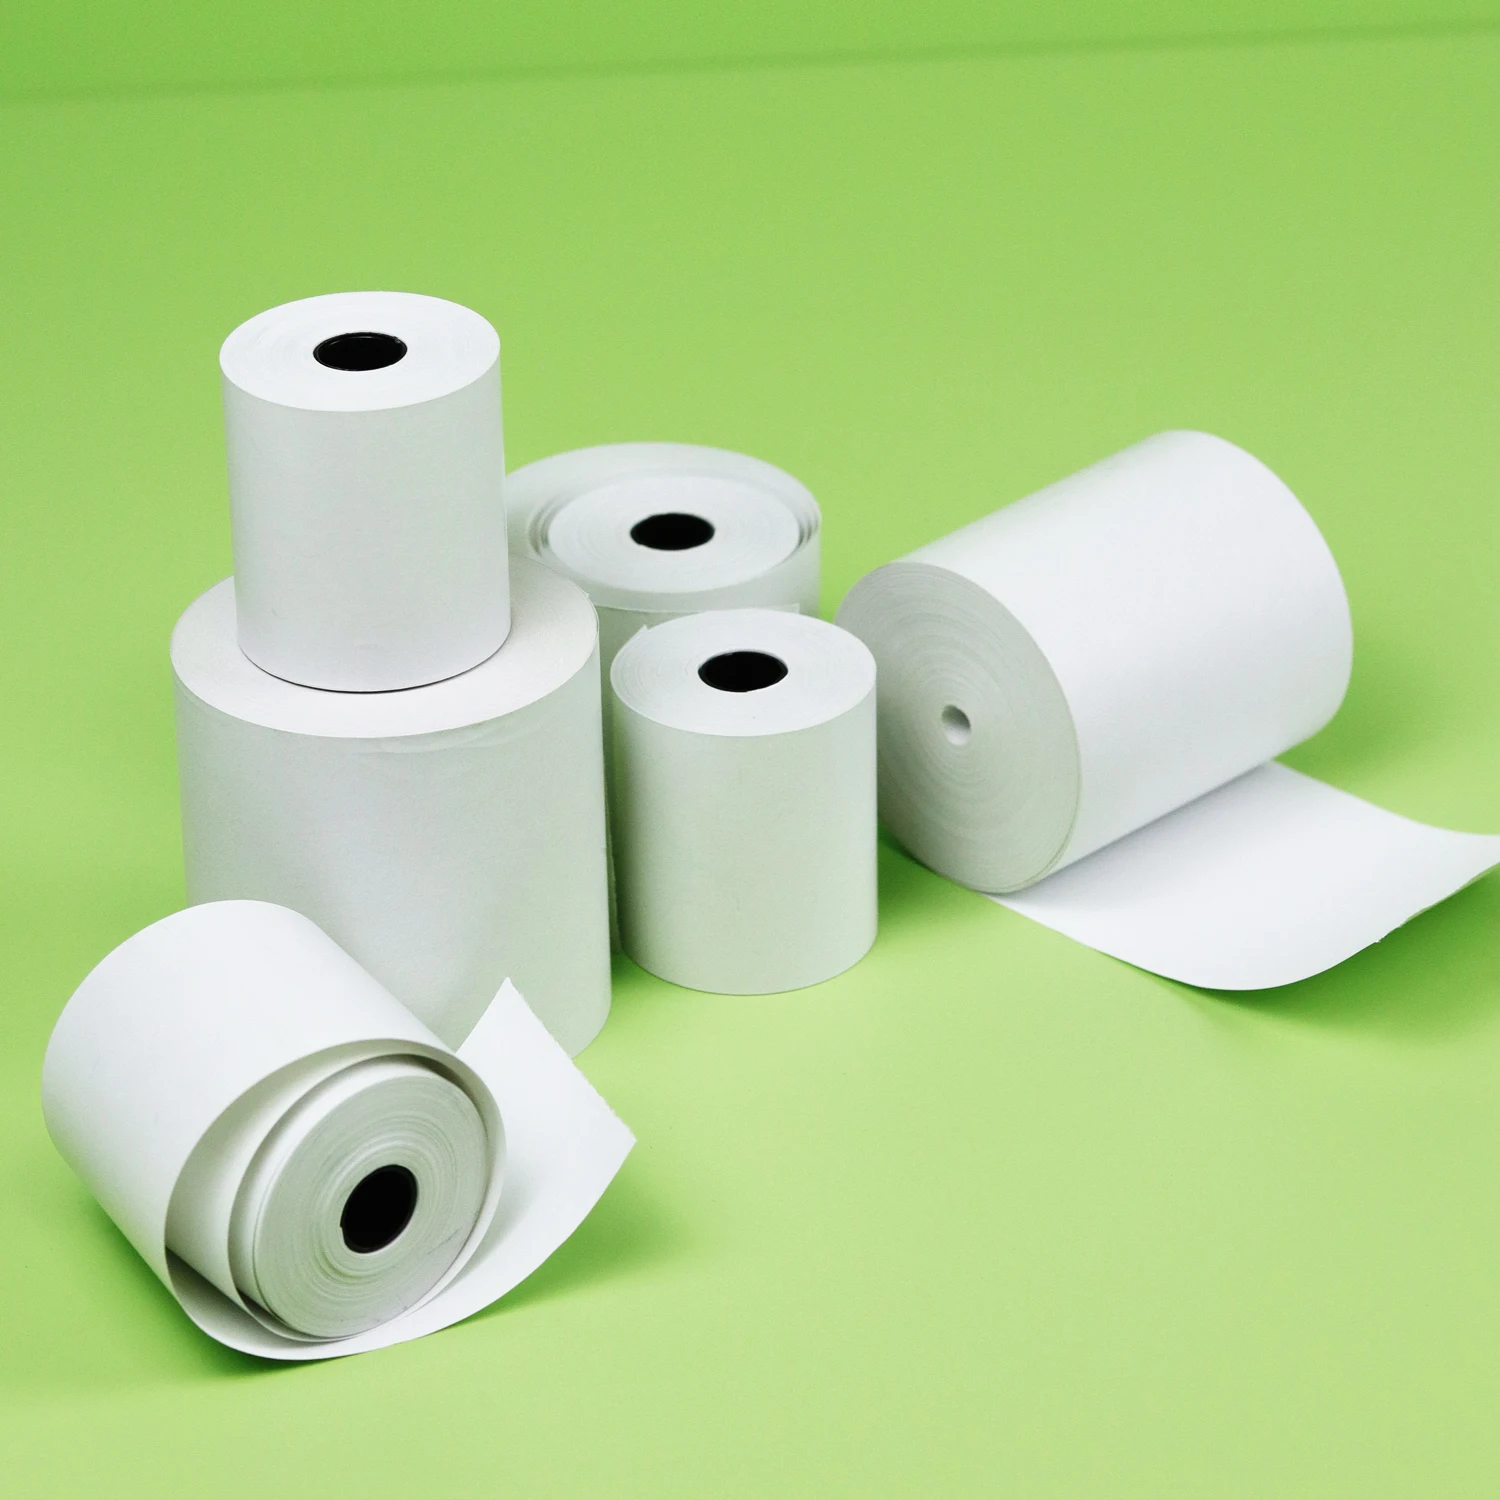 China Manufacturers Factory Price Thermal Paper roll 57 X 40 80x80 Thermal Paper roll